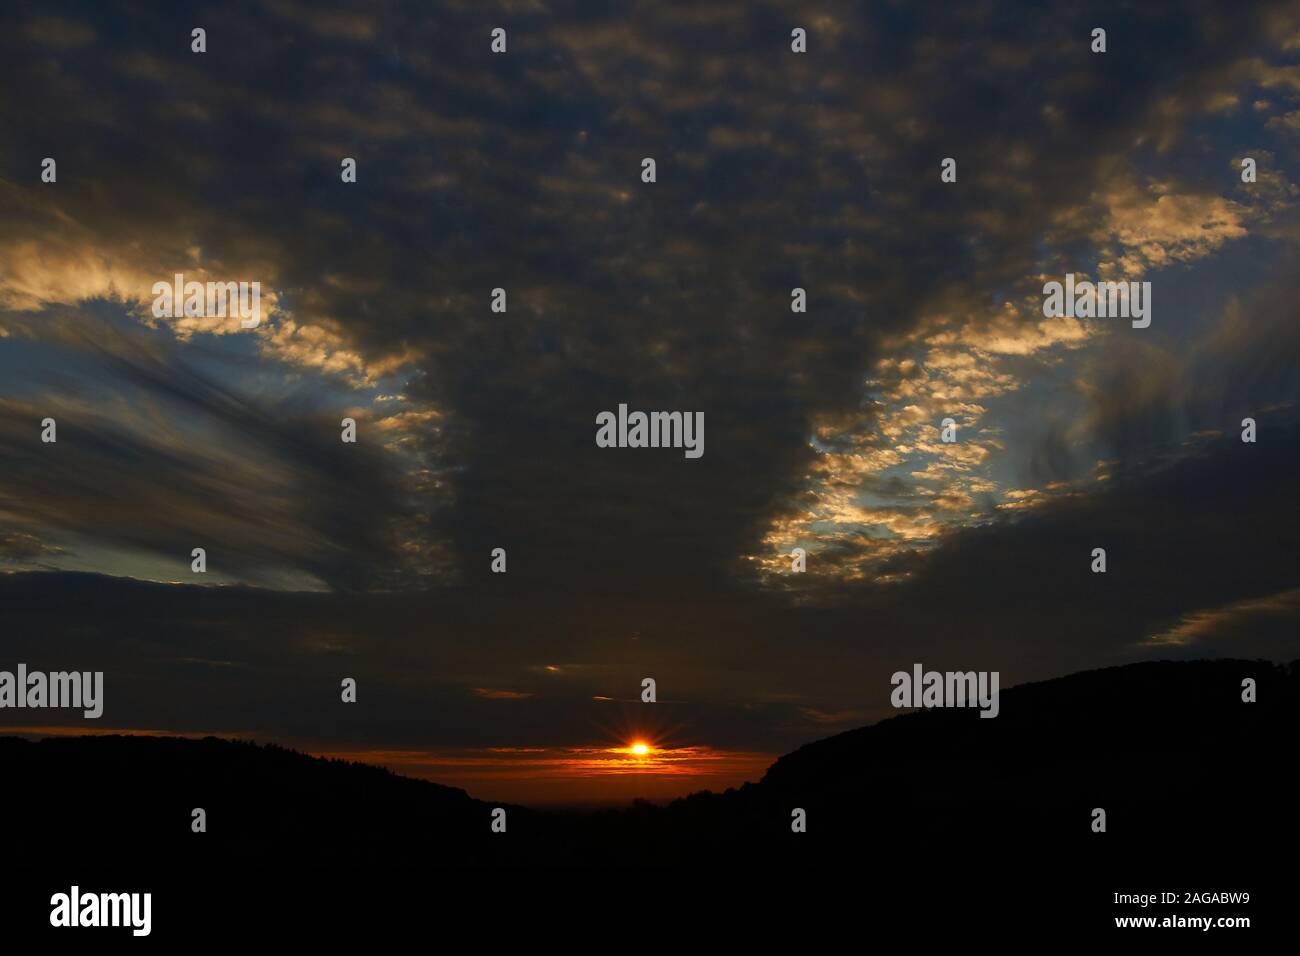 sunset sky with punch hole clouds Stock Photo